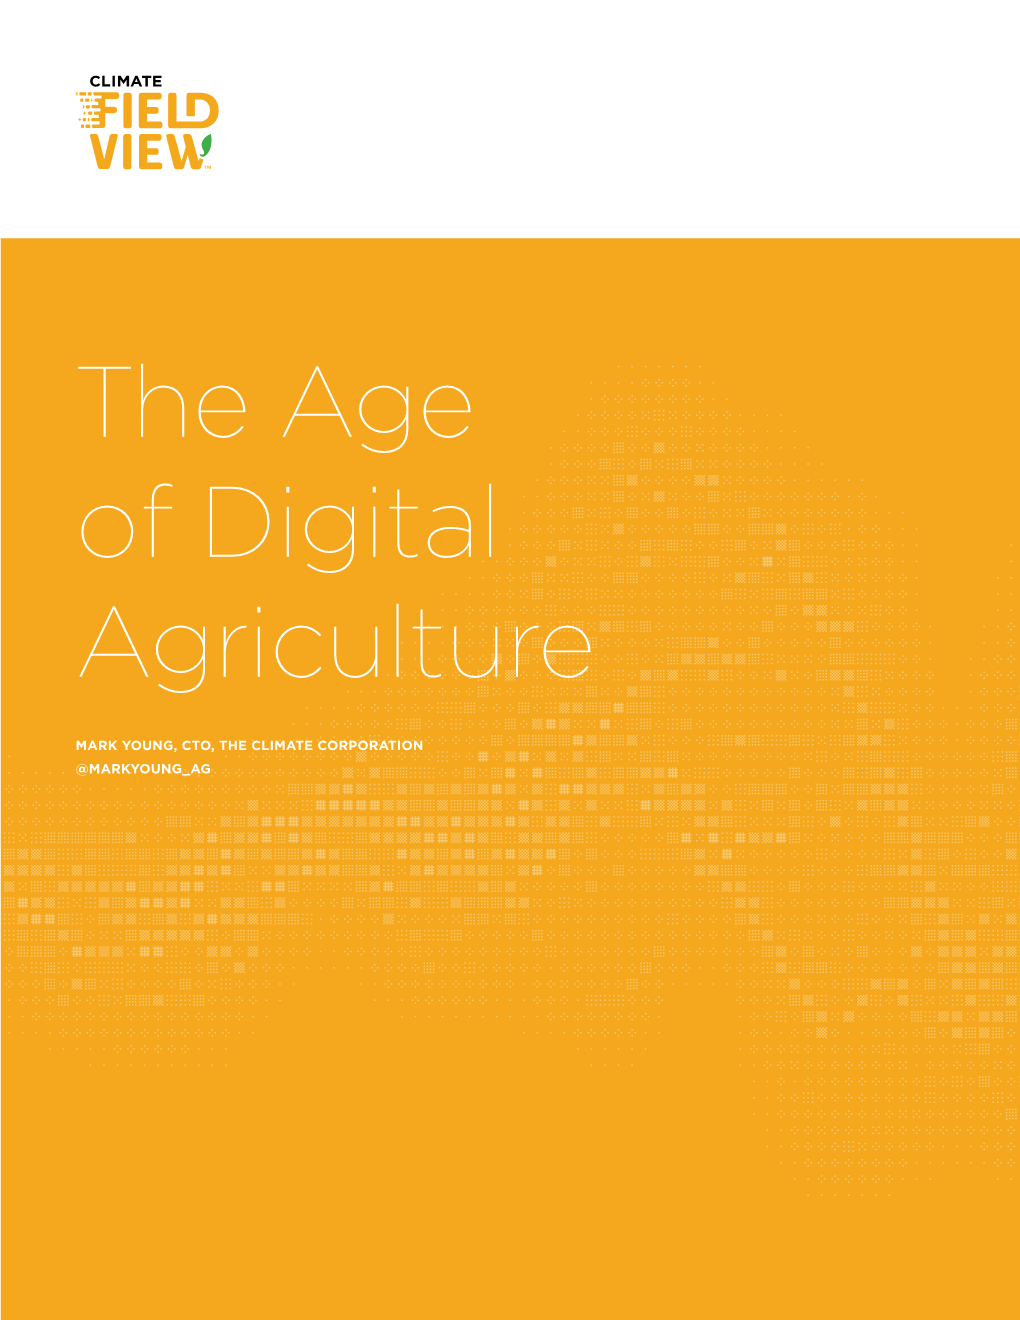 The Age of Digital Agriculture